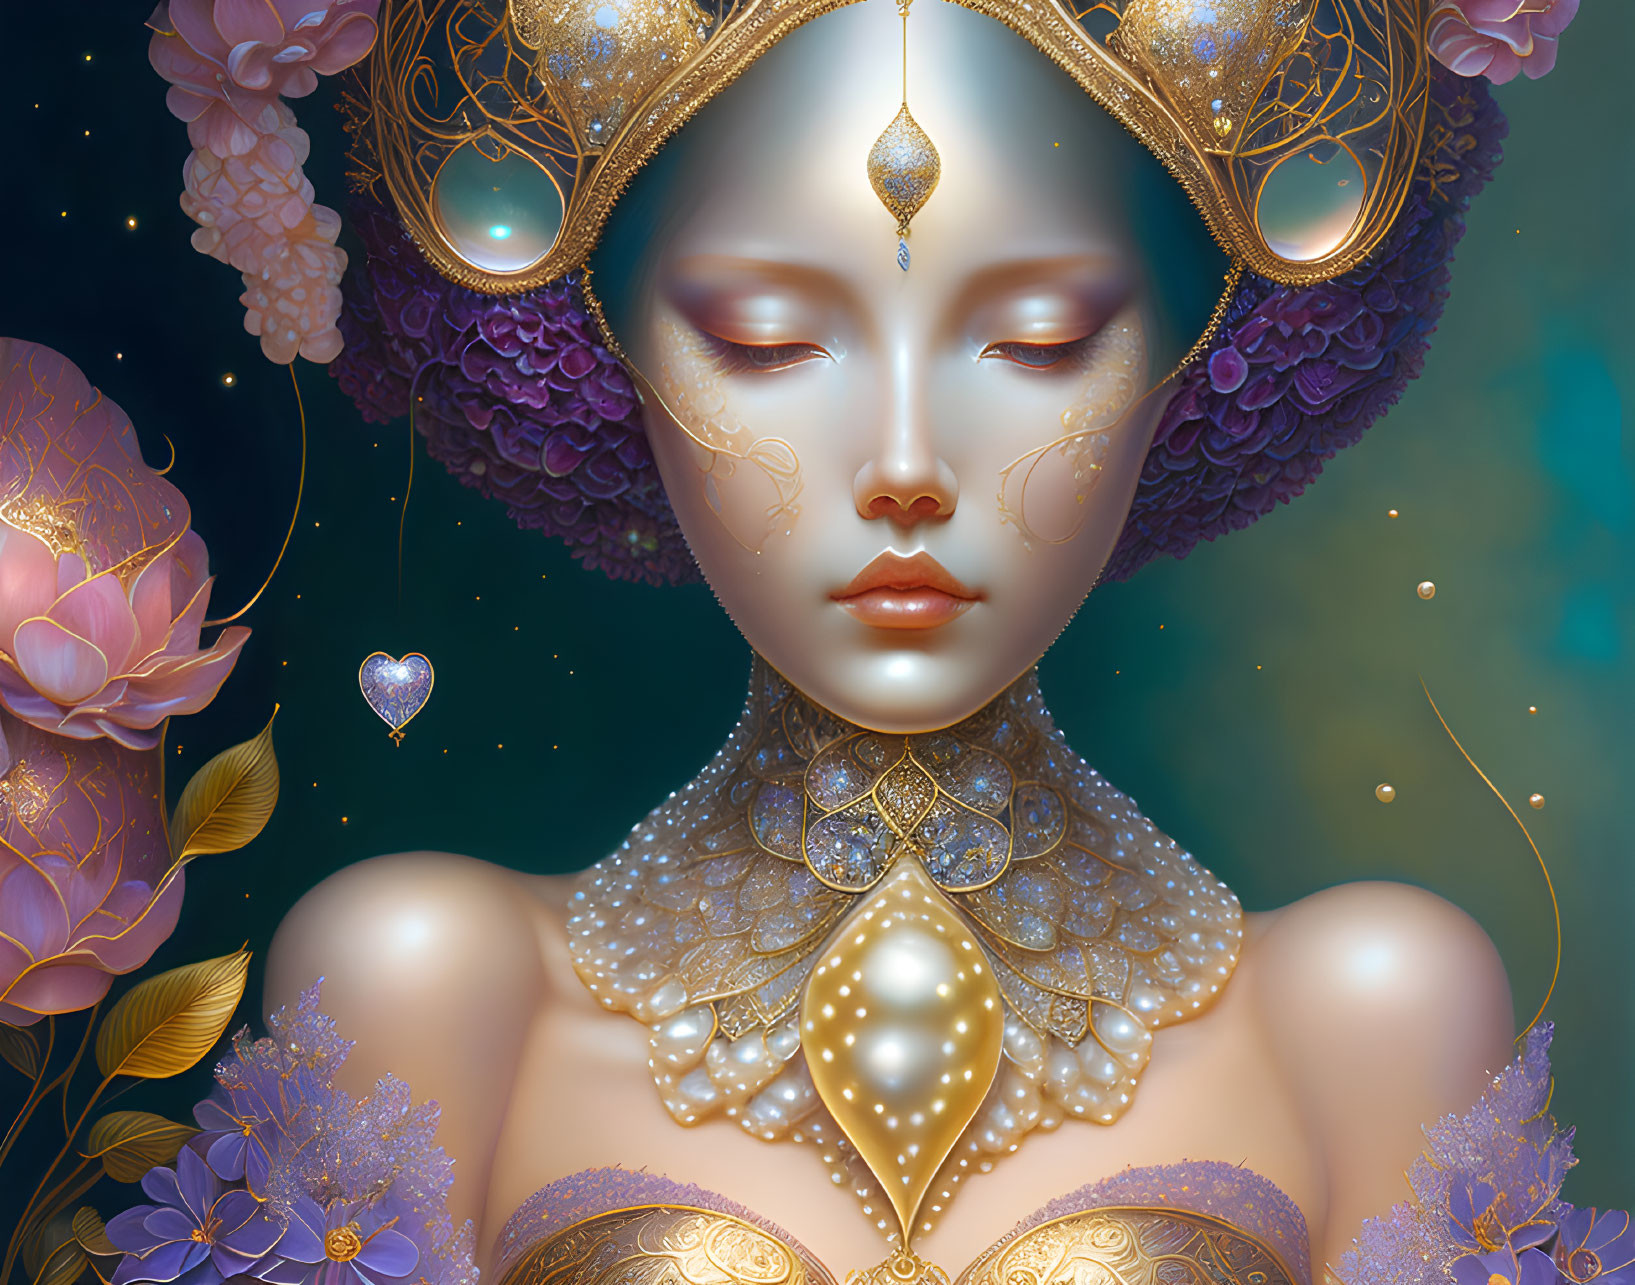 Ethereal woman illustration with ornate headdress and gold accents